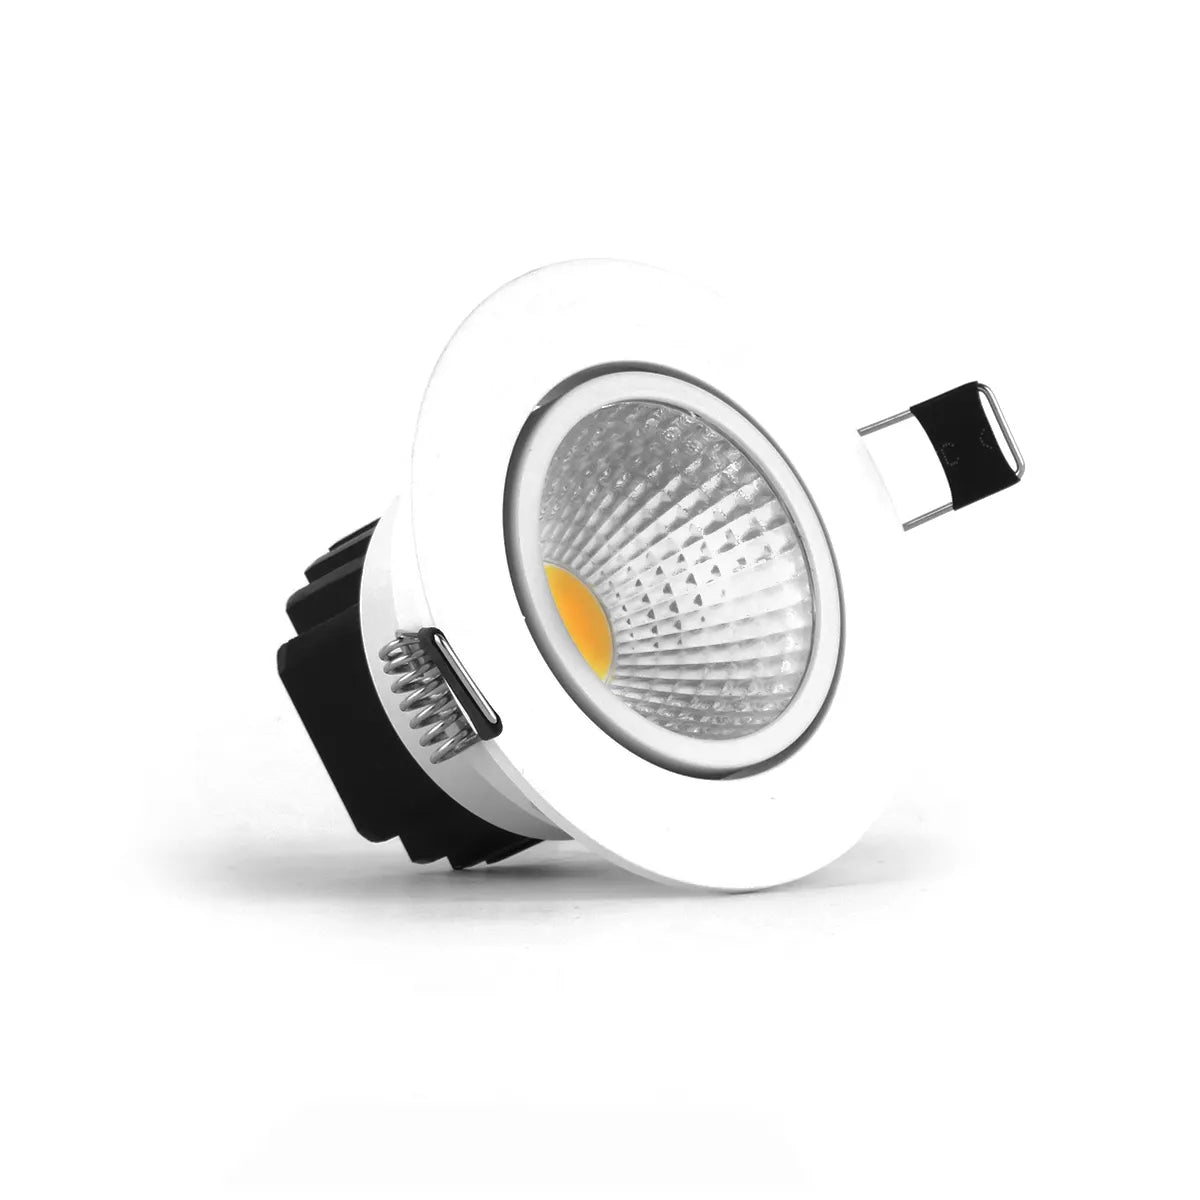 LED Recessed Spotlight 5W ⌀85mm dimmable tiltable